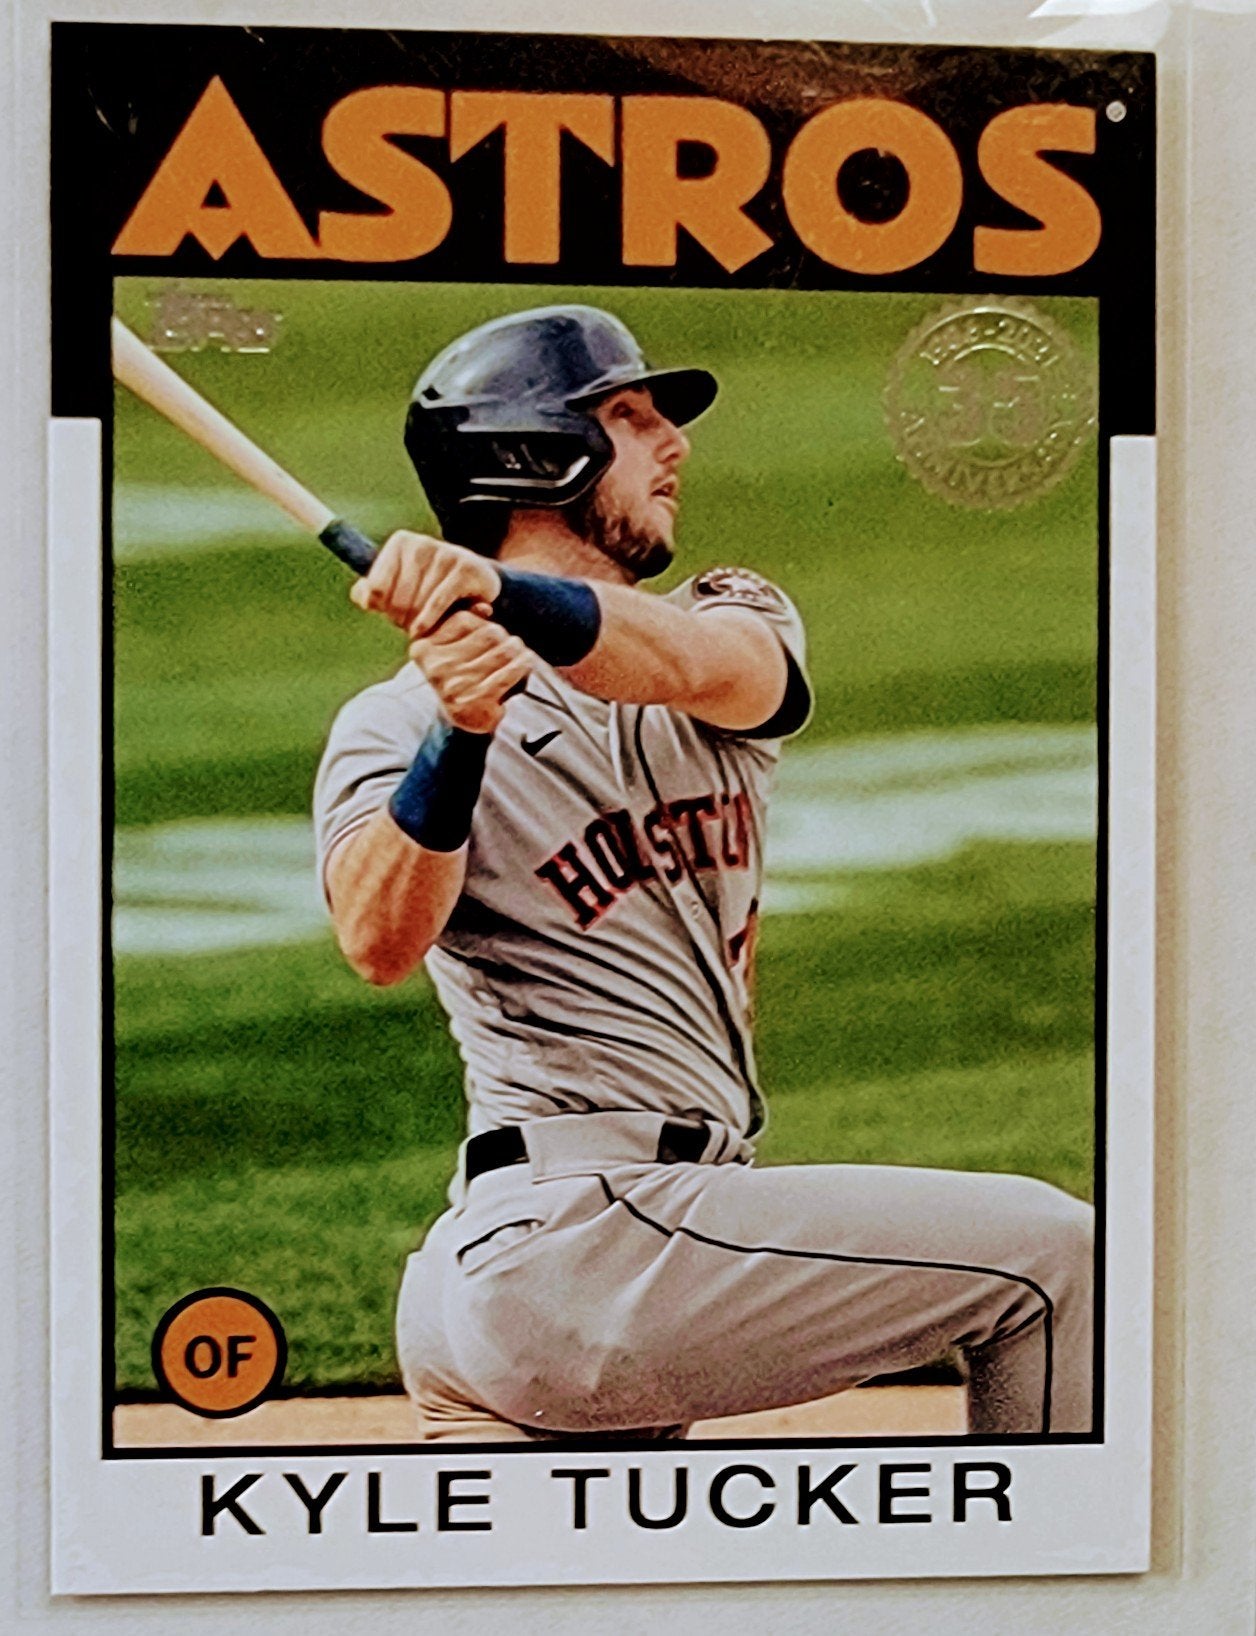 2021 Topps Kyle Tucker 1986 35th Anniversary Baseball Card AVM1 simple Xclusive Collectibles   